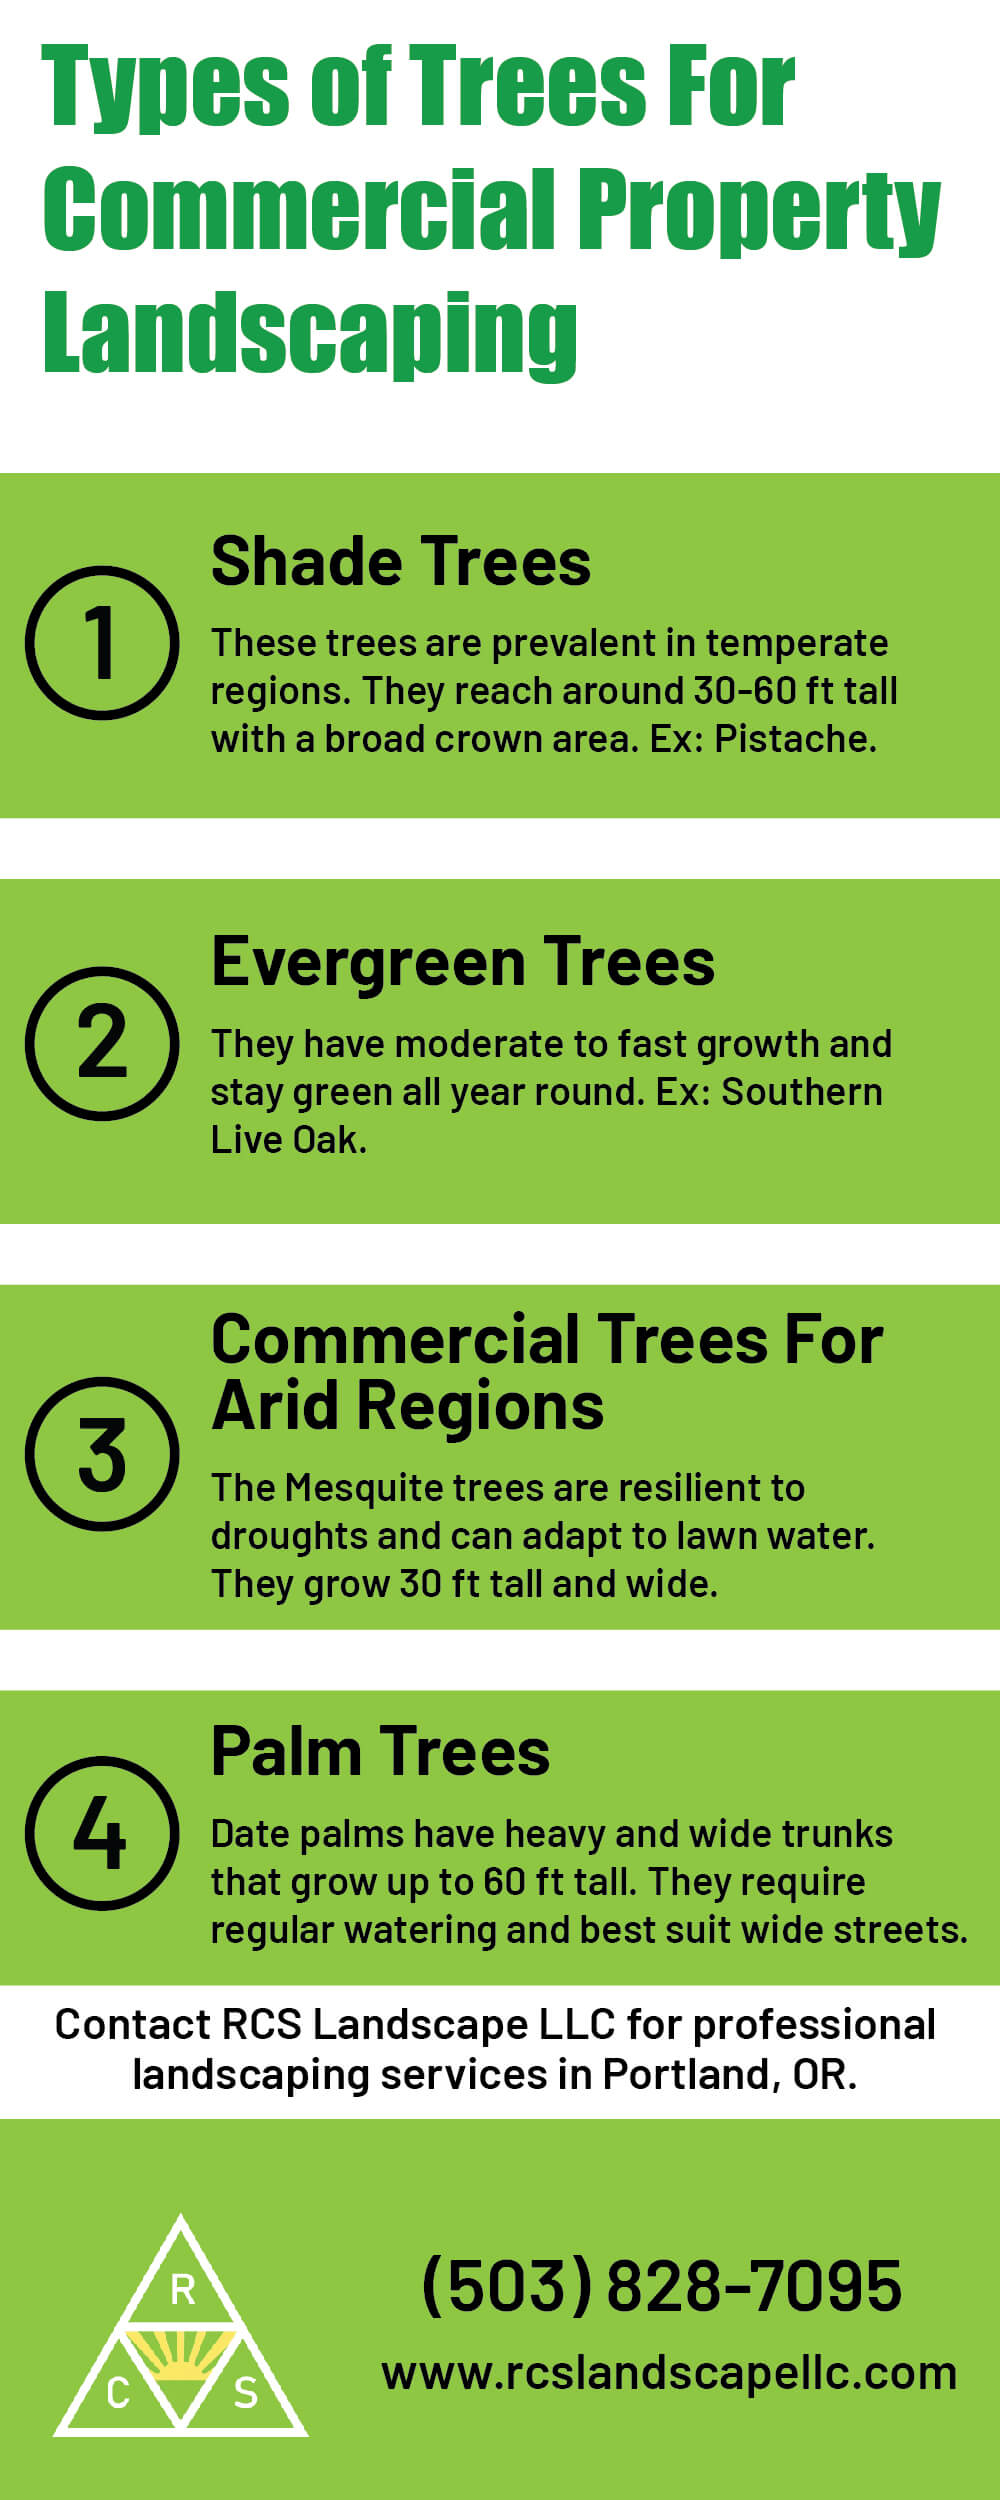 Types of Trees For Commercial Property Landscaping